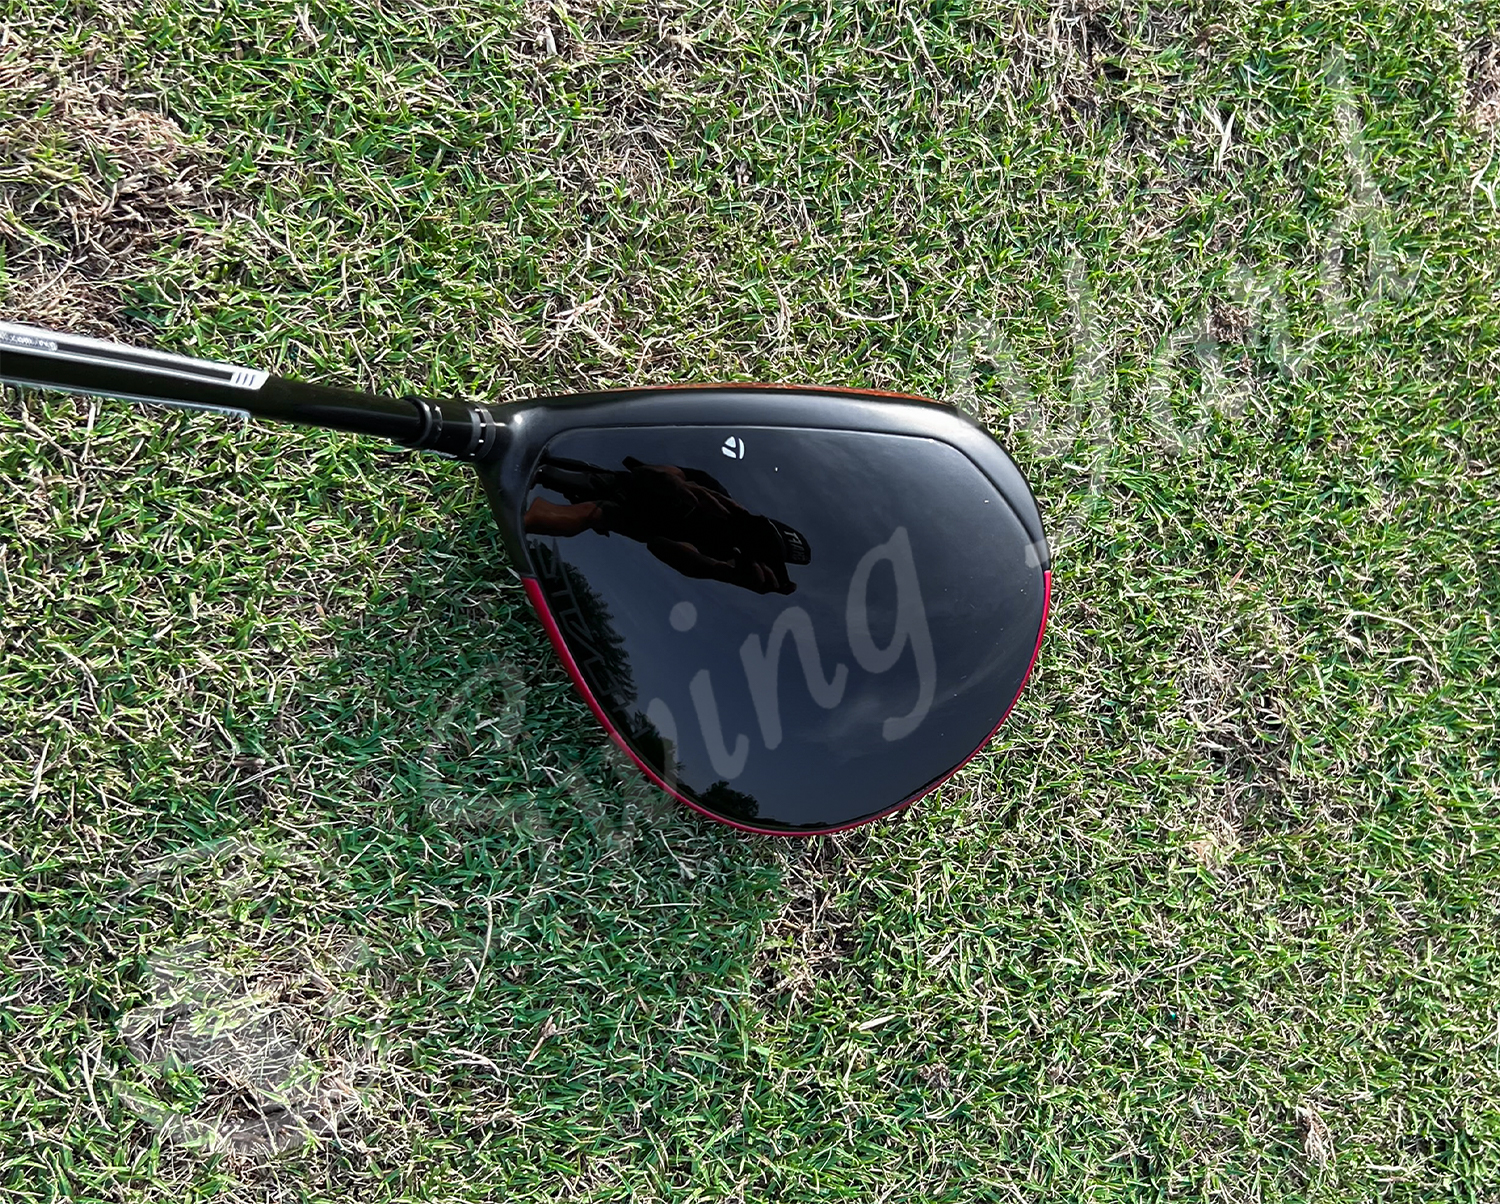 A closer view of TaylorMade Stealth 2 driver crown